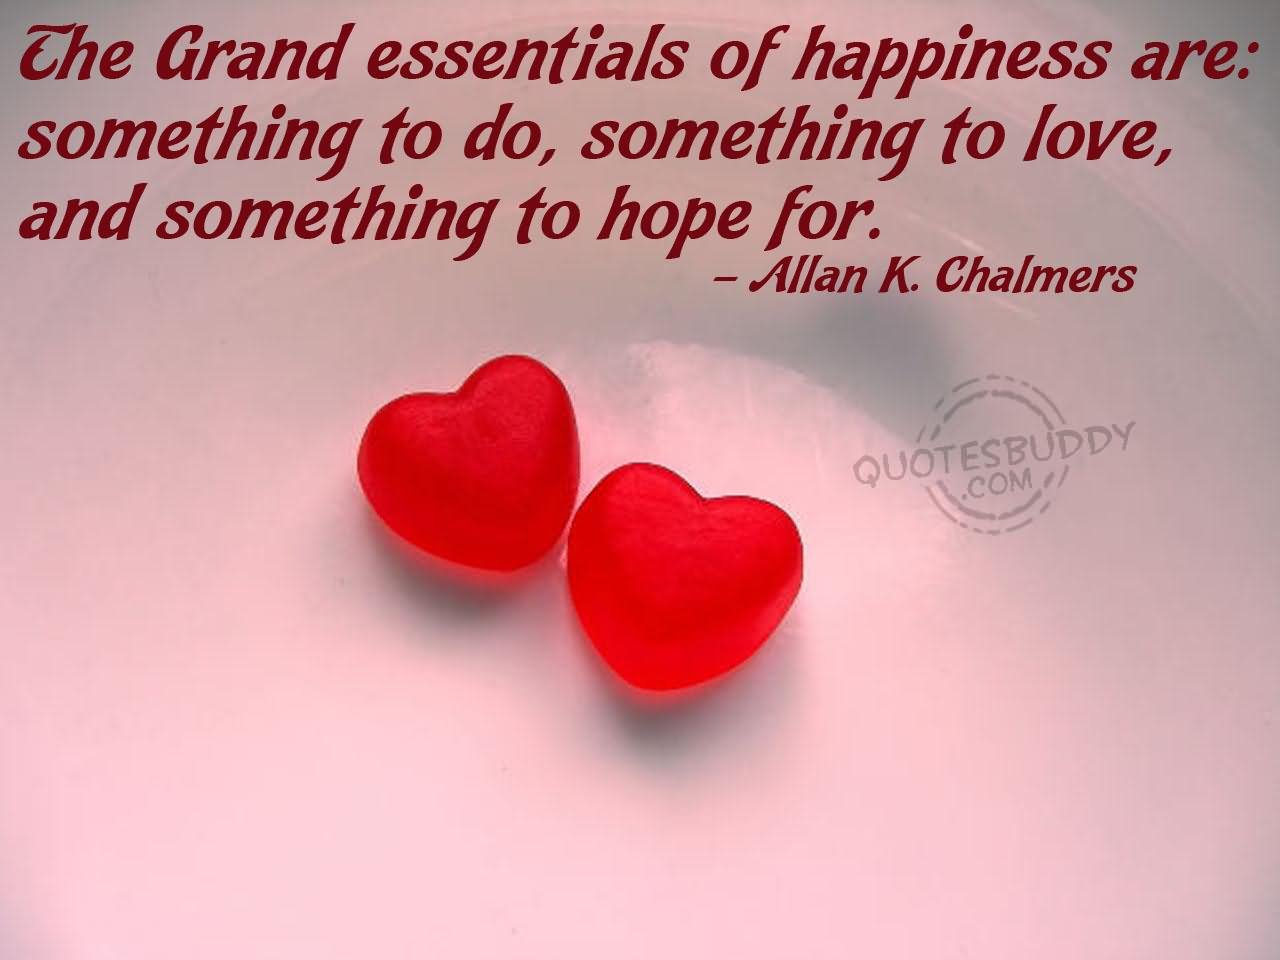 The grand essentials of happiness are something to do something to love and something